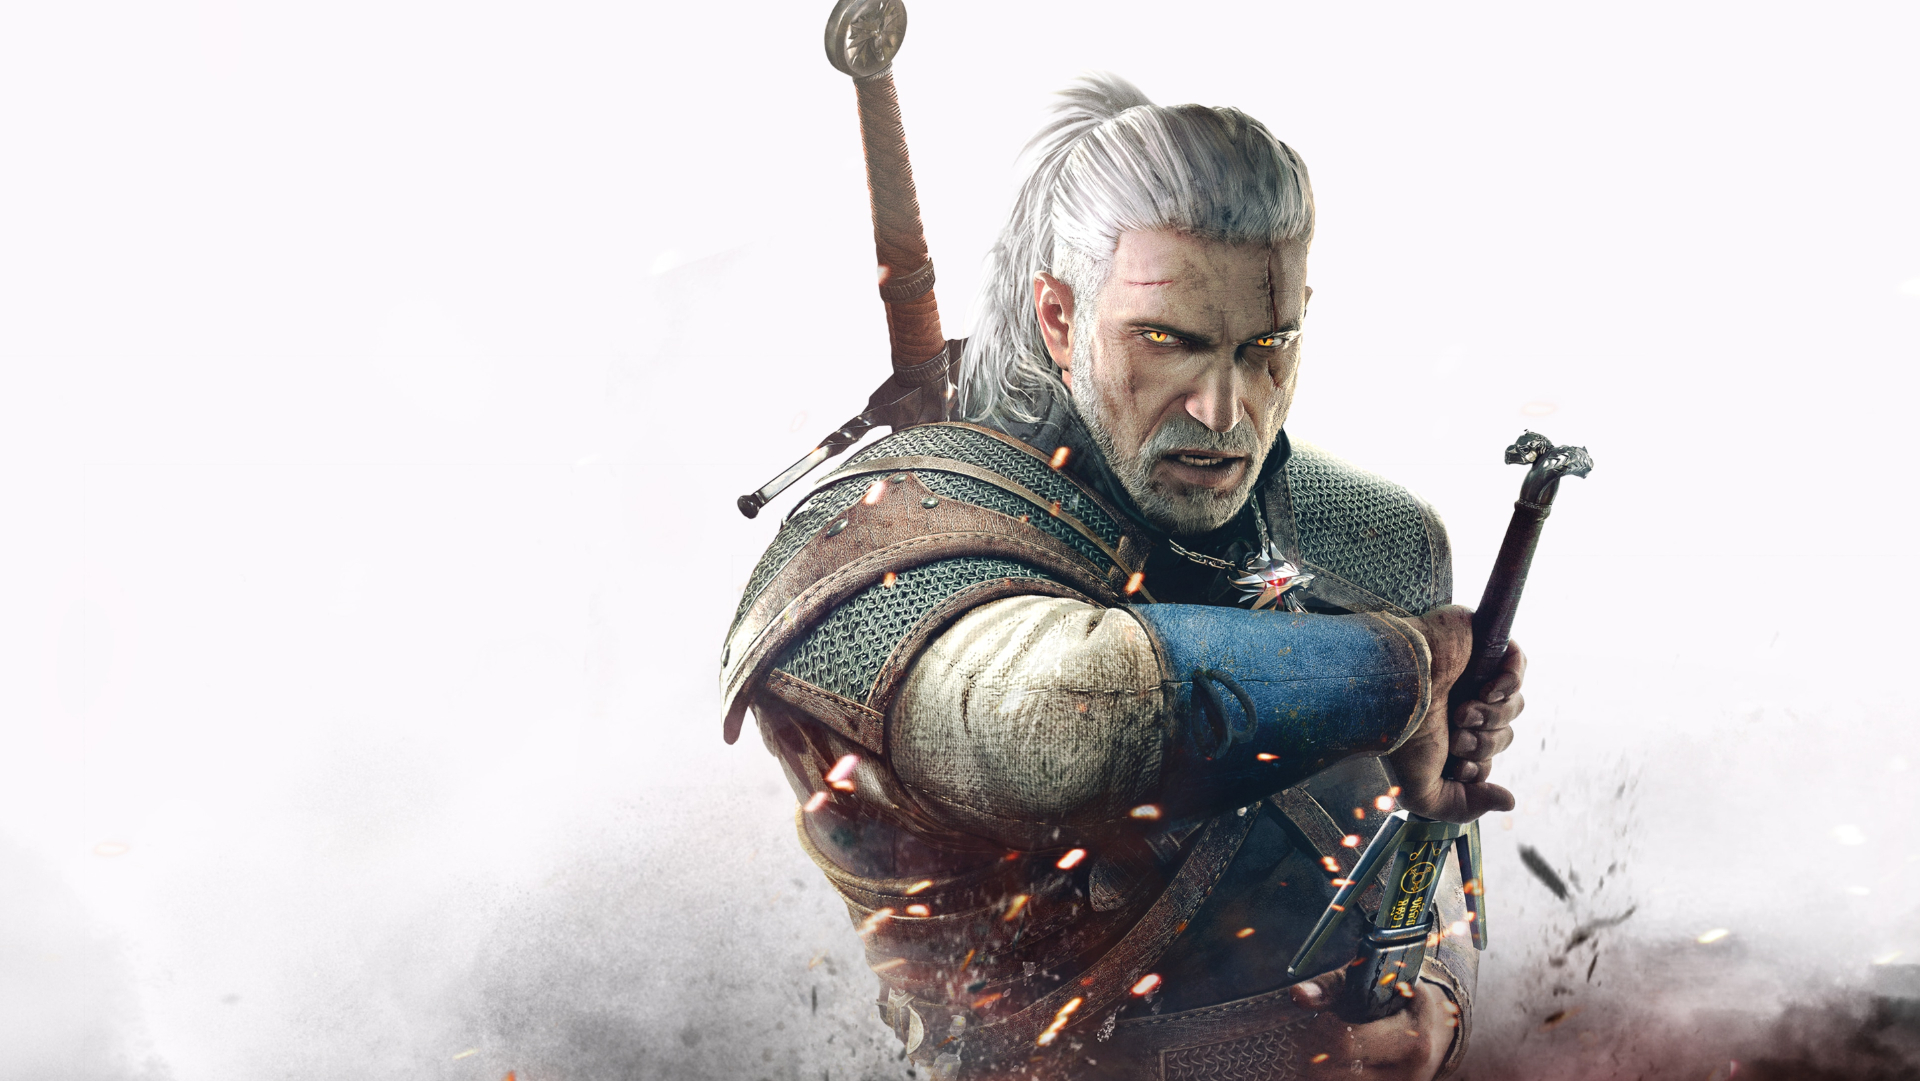 Geralt drawing his sword in The Witcher 3 promo art.